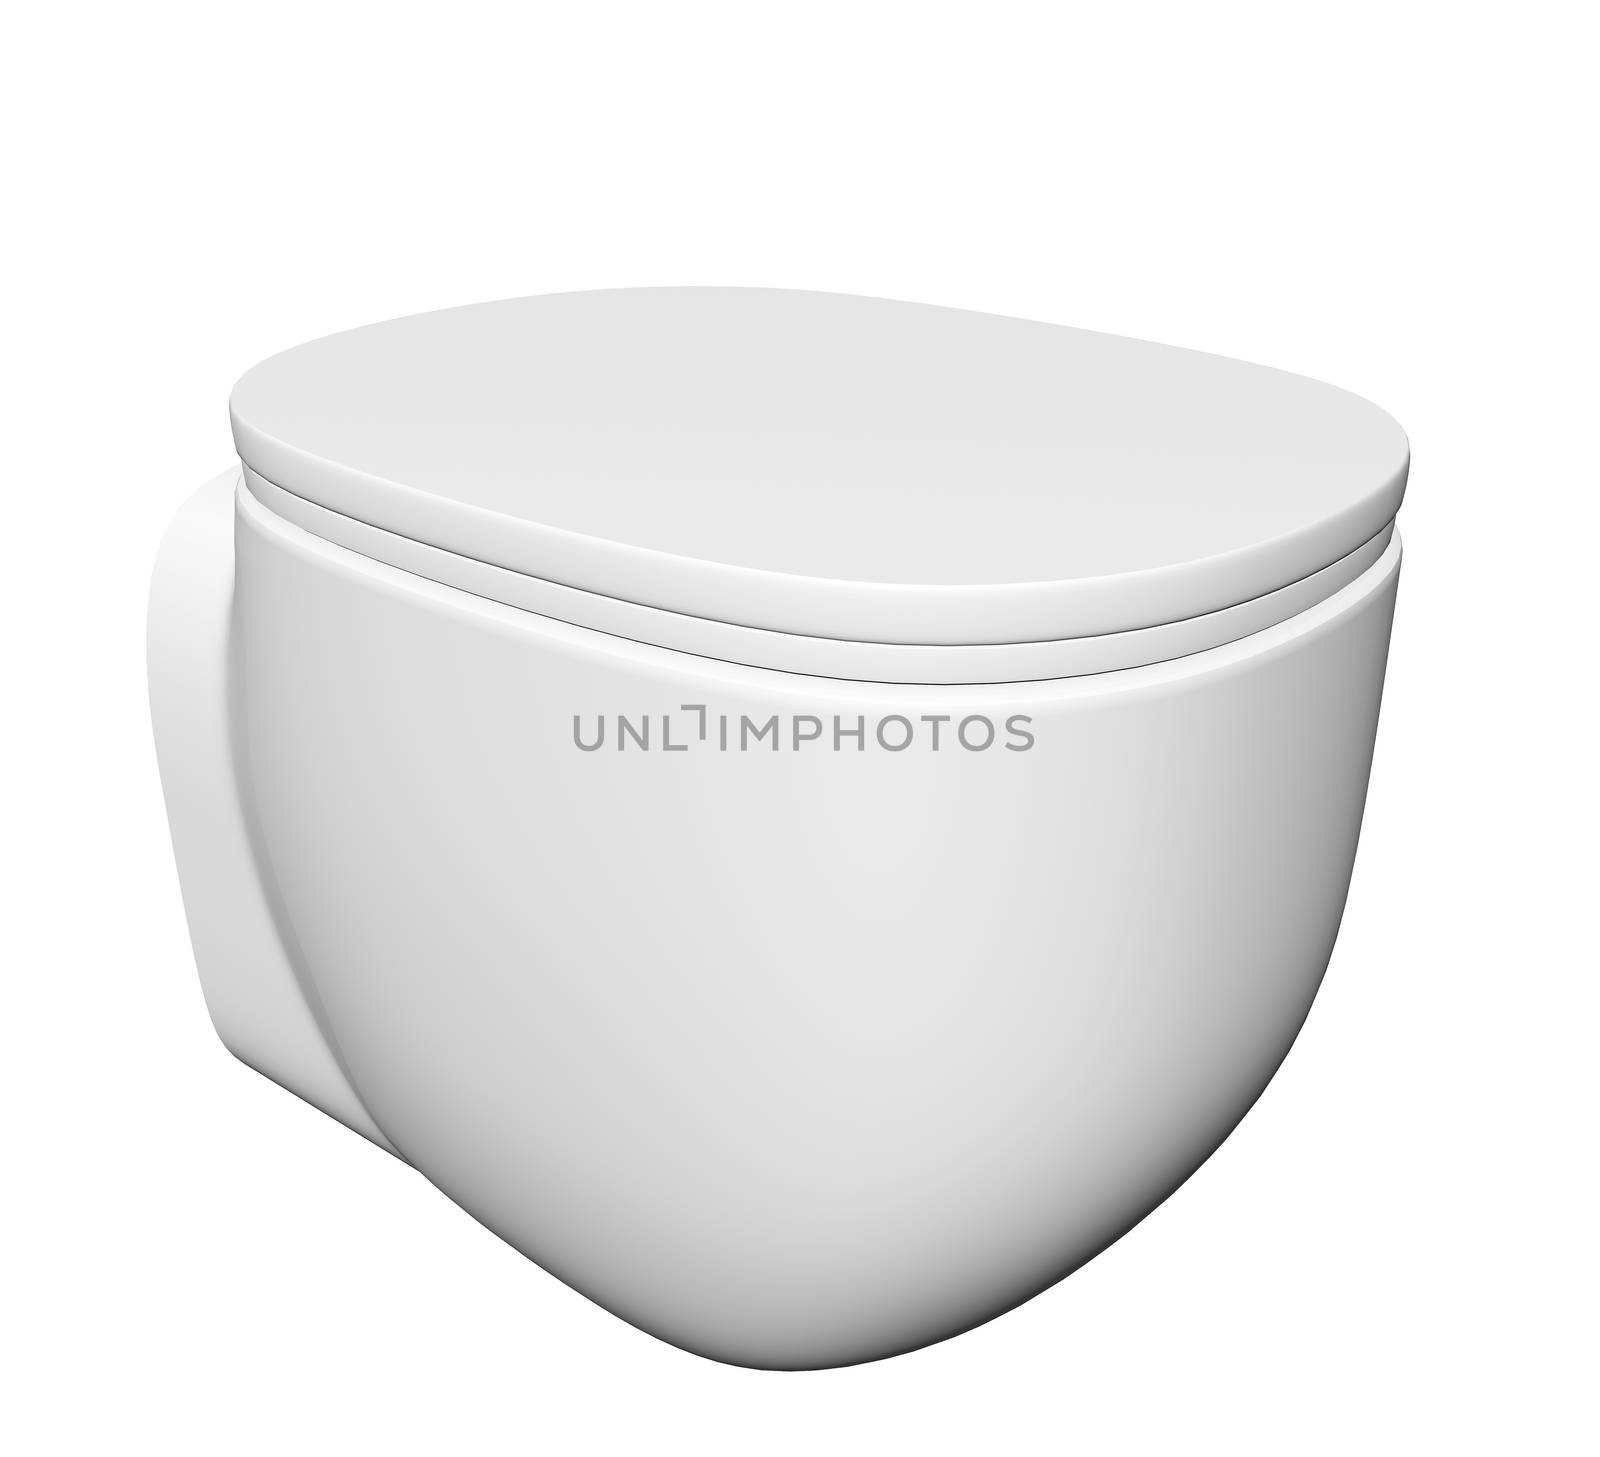 Modern white ceramic and acrylic toilet bowl and lid, isolated against a white background. 3D illustration by Morphart